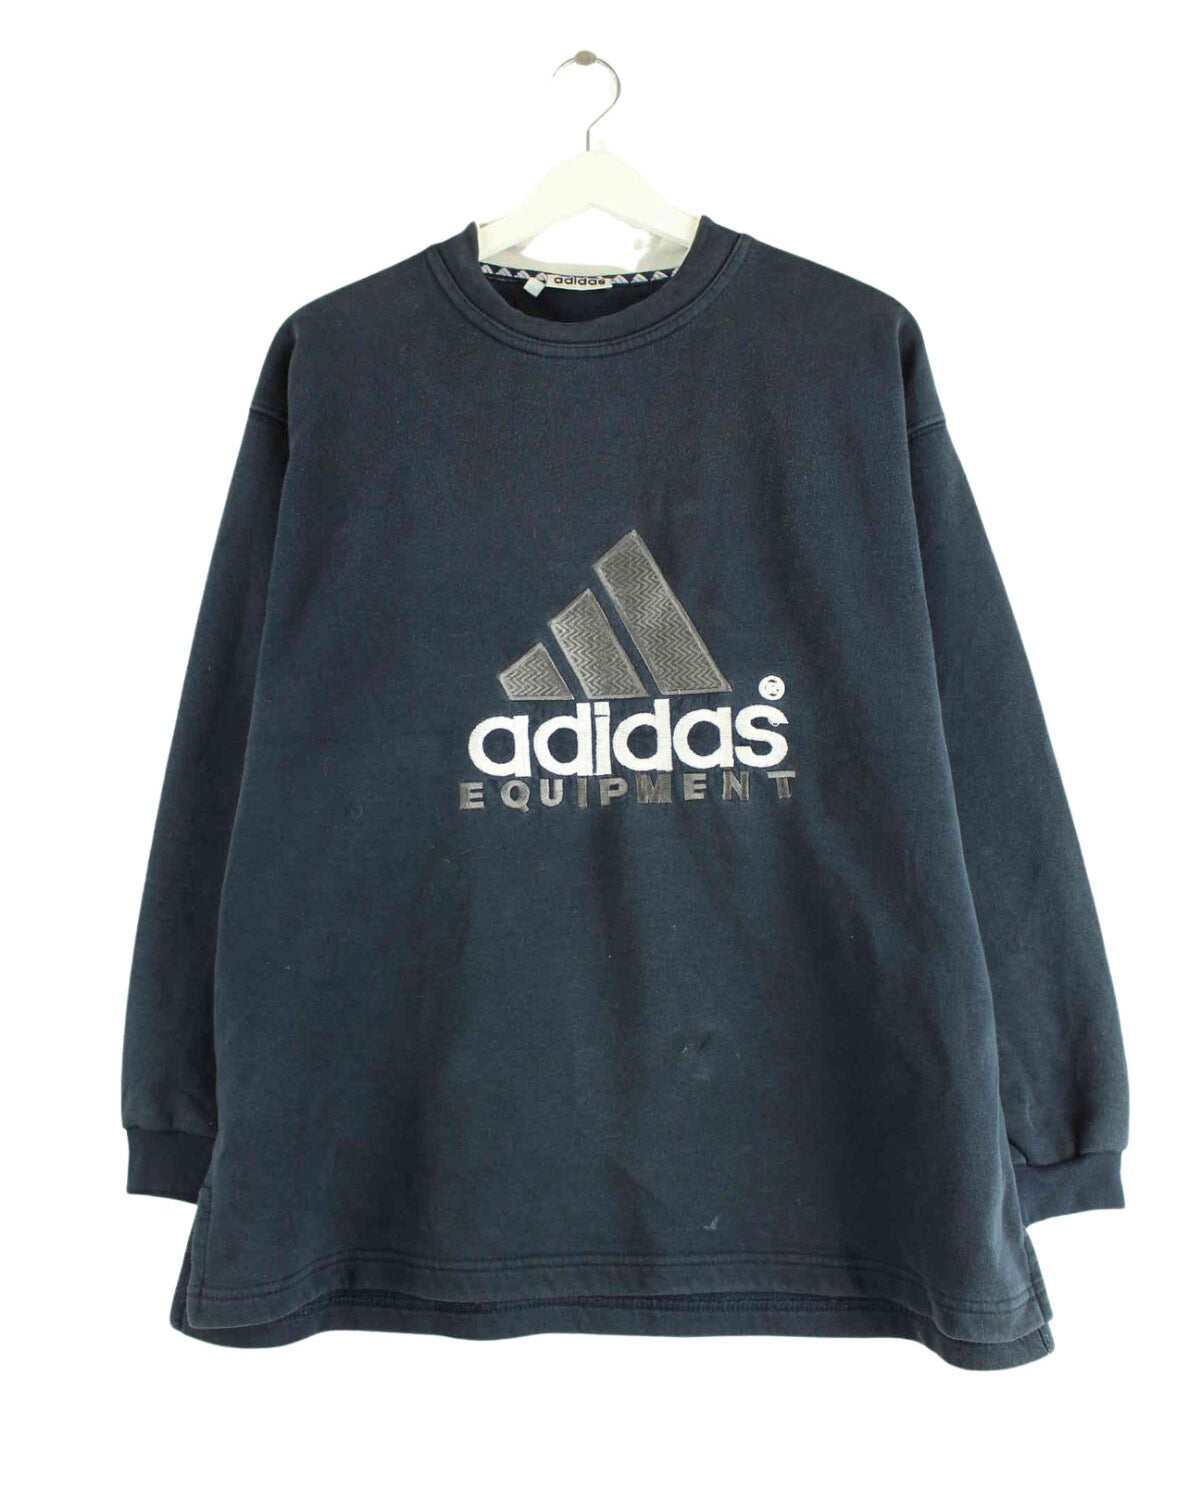 Adidas Equipment 90s Vintage Embroidered Sweater Blau S (front image)